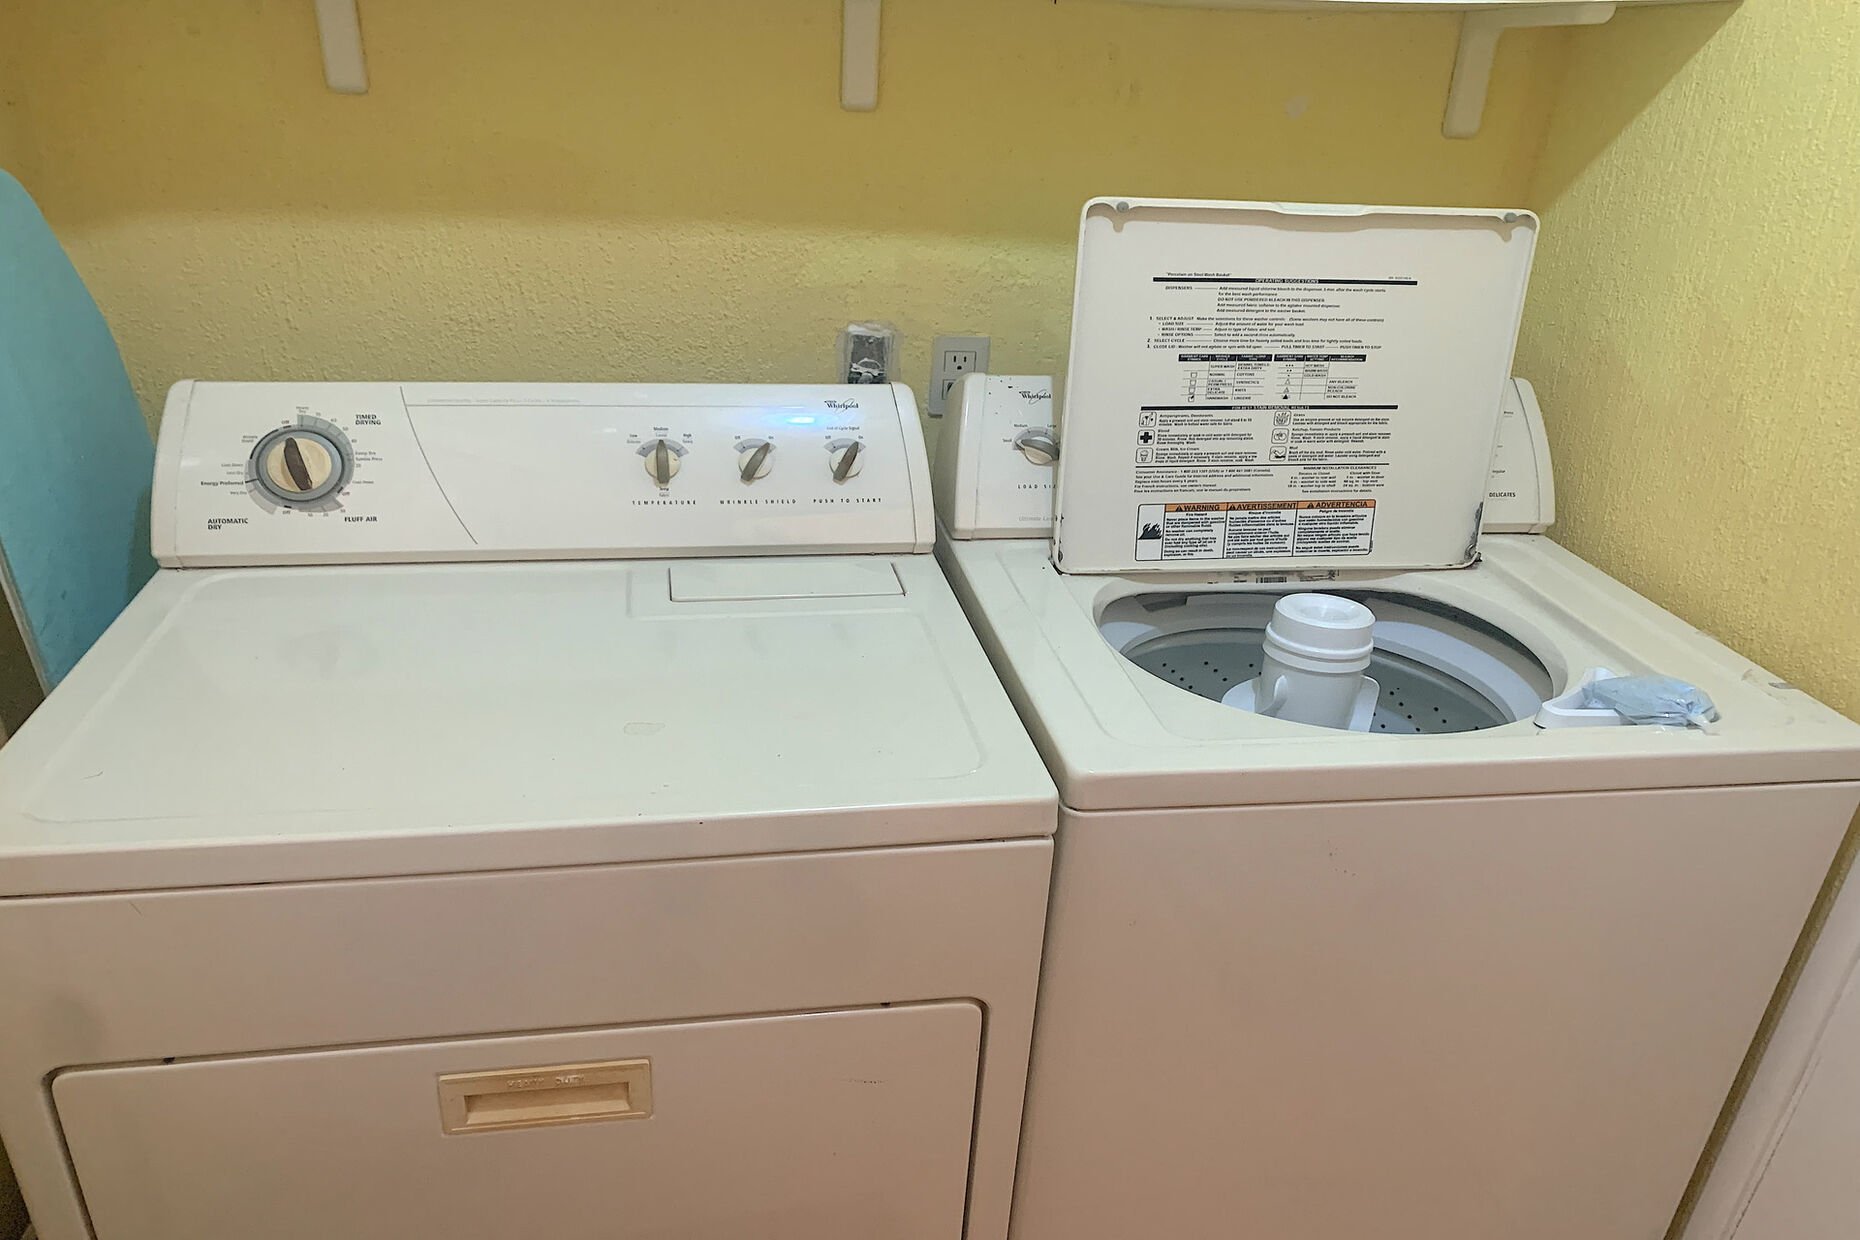 washer and dryer in a separate utility room